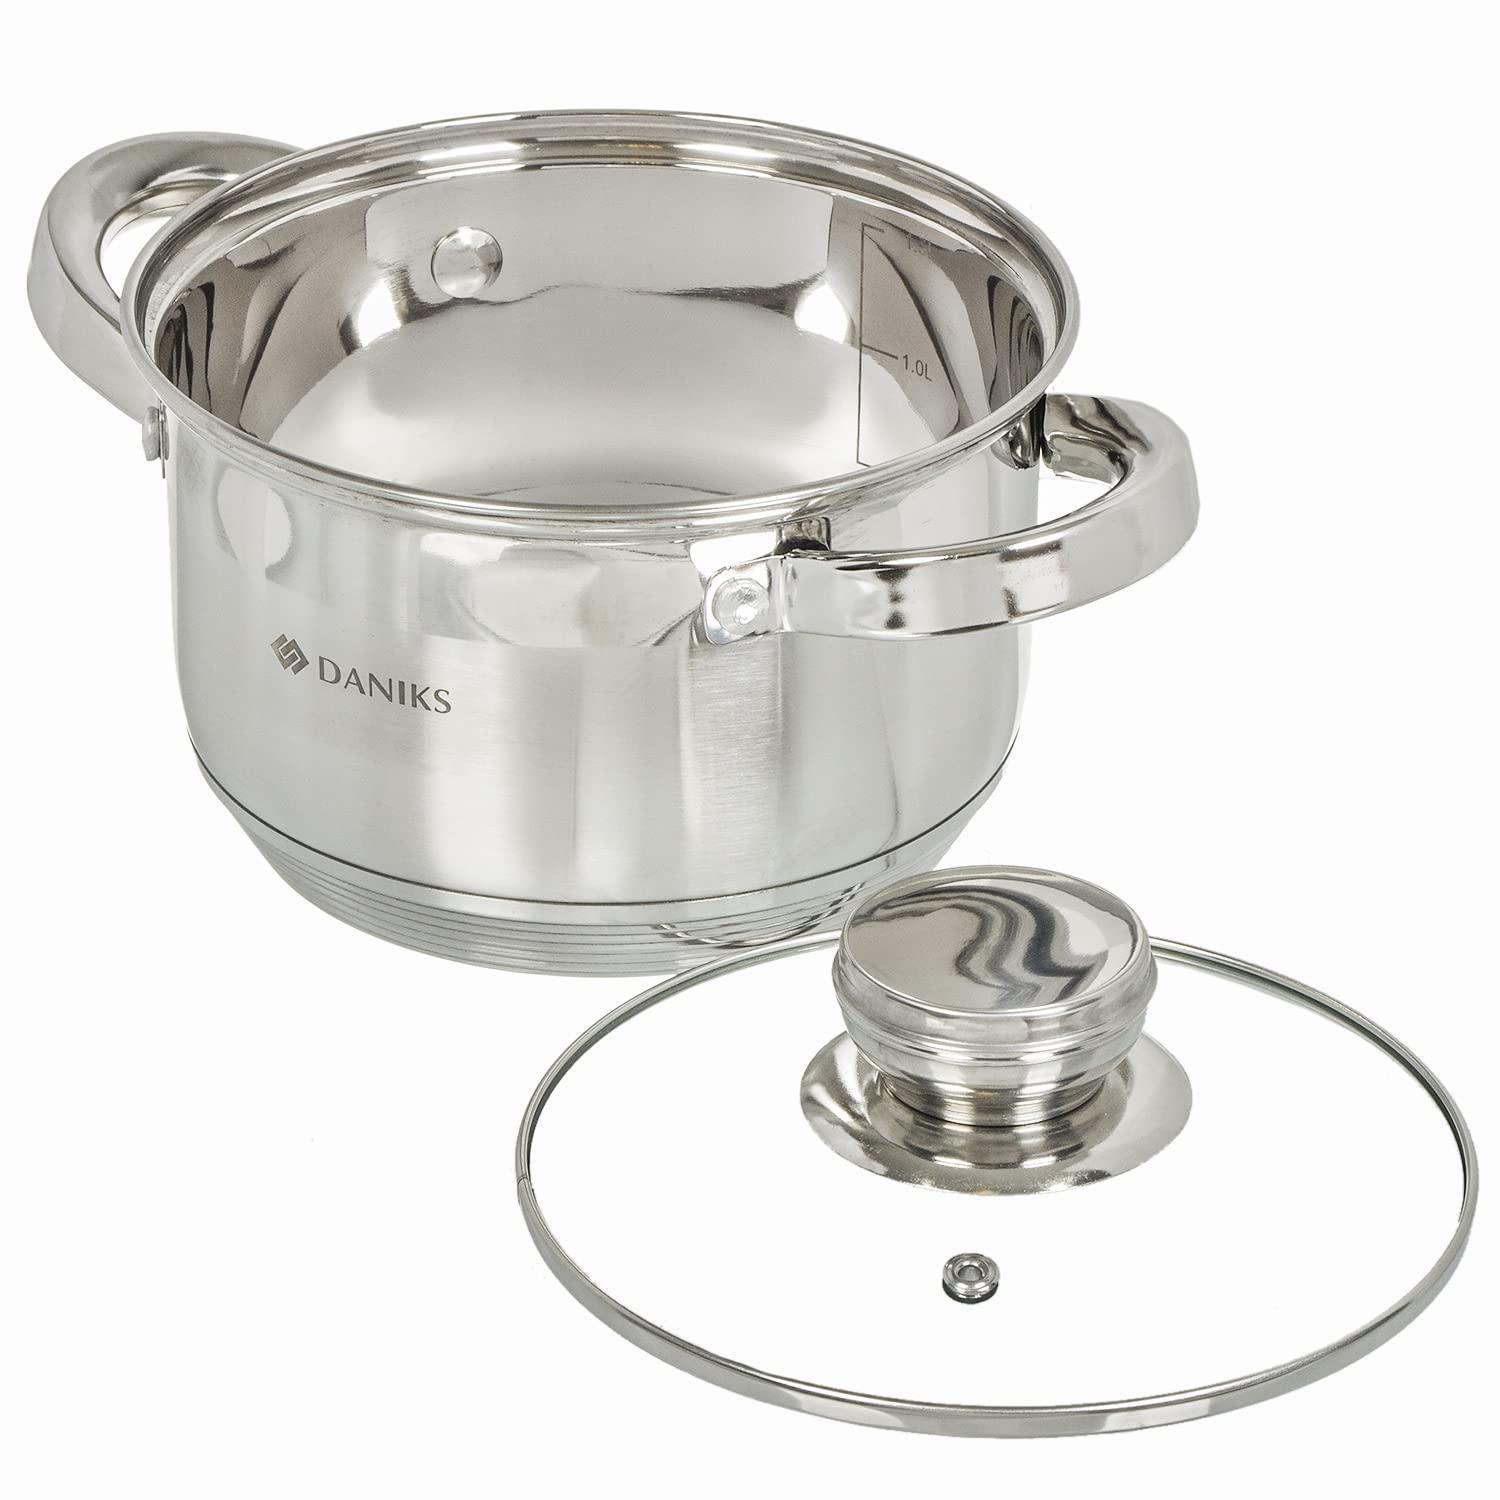 Daniks Standard Stainless Steel Stock Pot with Glass Lid | Induction 3 Quart | Dishwasher Safe Pot | Measuring Scale | Soup Pasta Stew Pot | Silver - CookCave